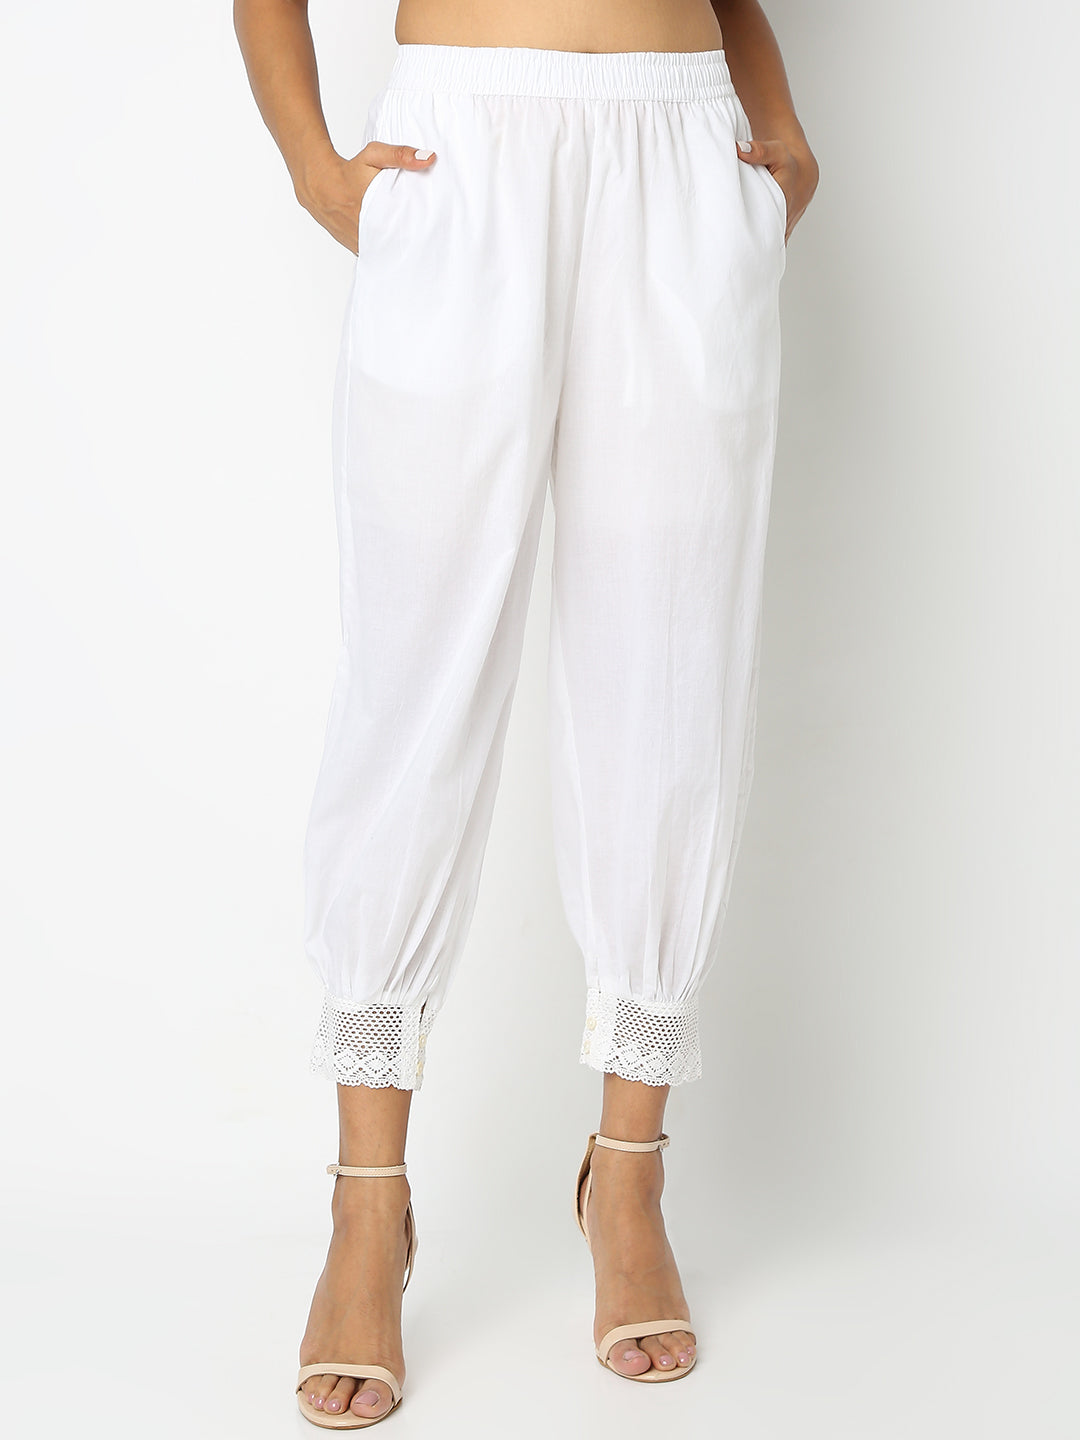 Buy Palazzo Pants in White Cotton Fabric, Elastic Waist, Ethnic Prints,  Wide Leg Palazzo With Flares, Cotton Beach Pants, White Palazzo Online in  India - Etsy